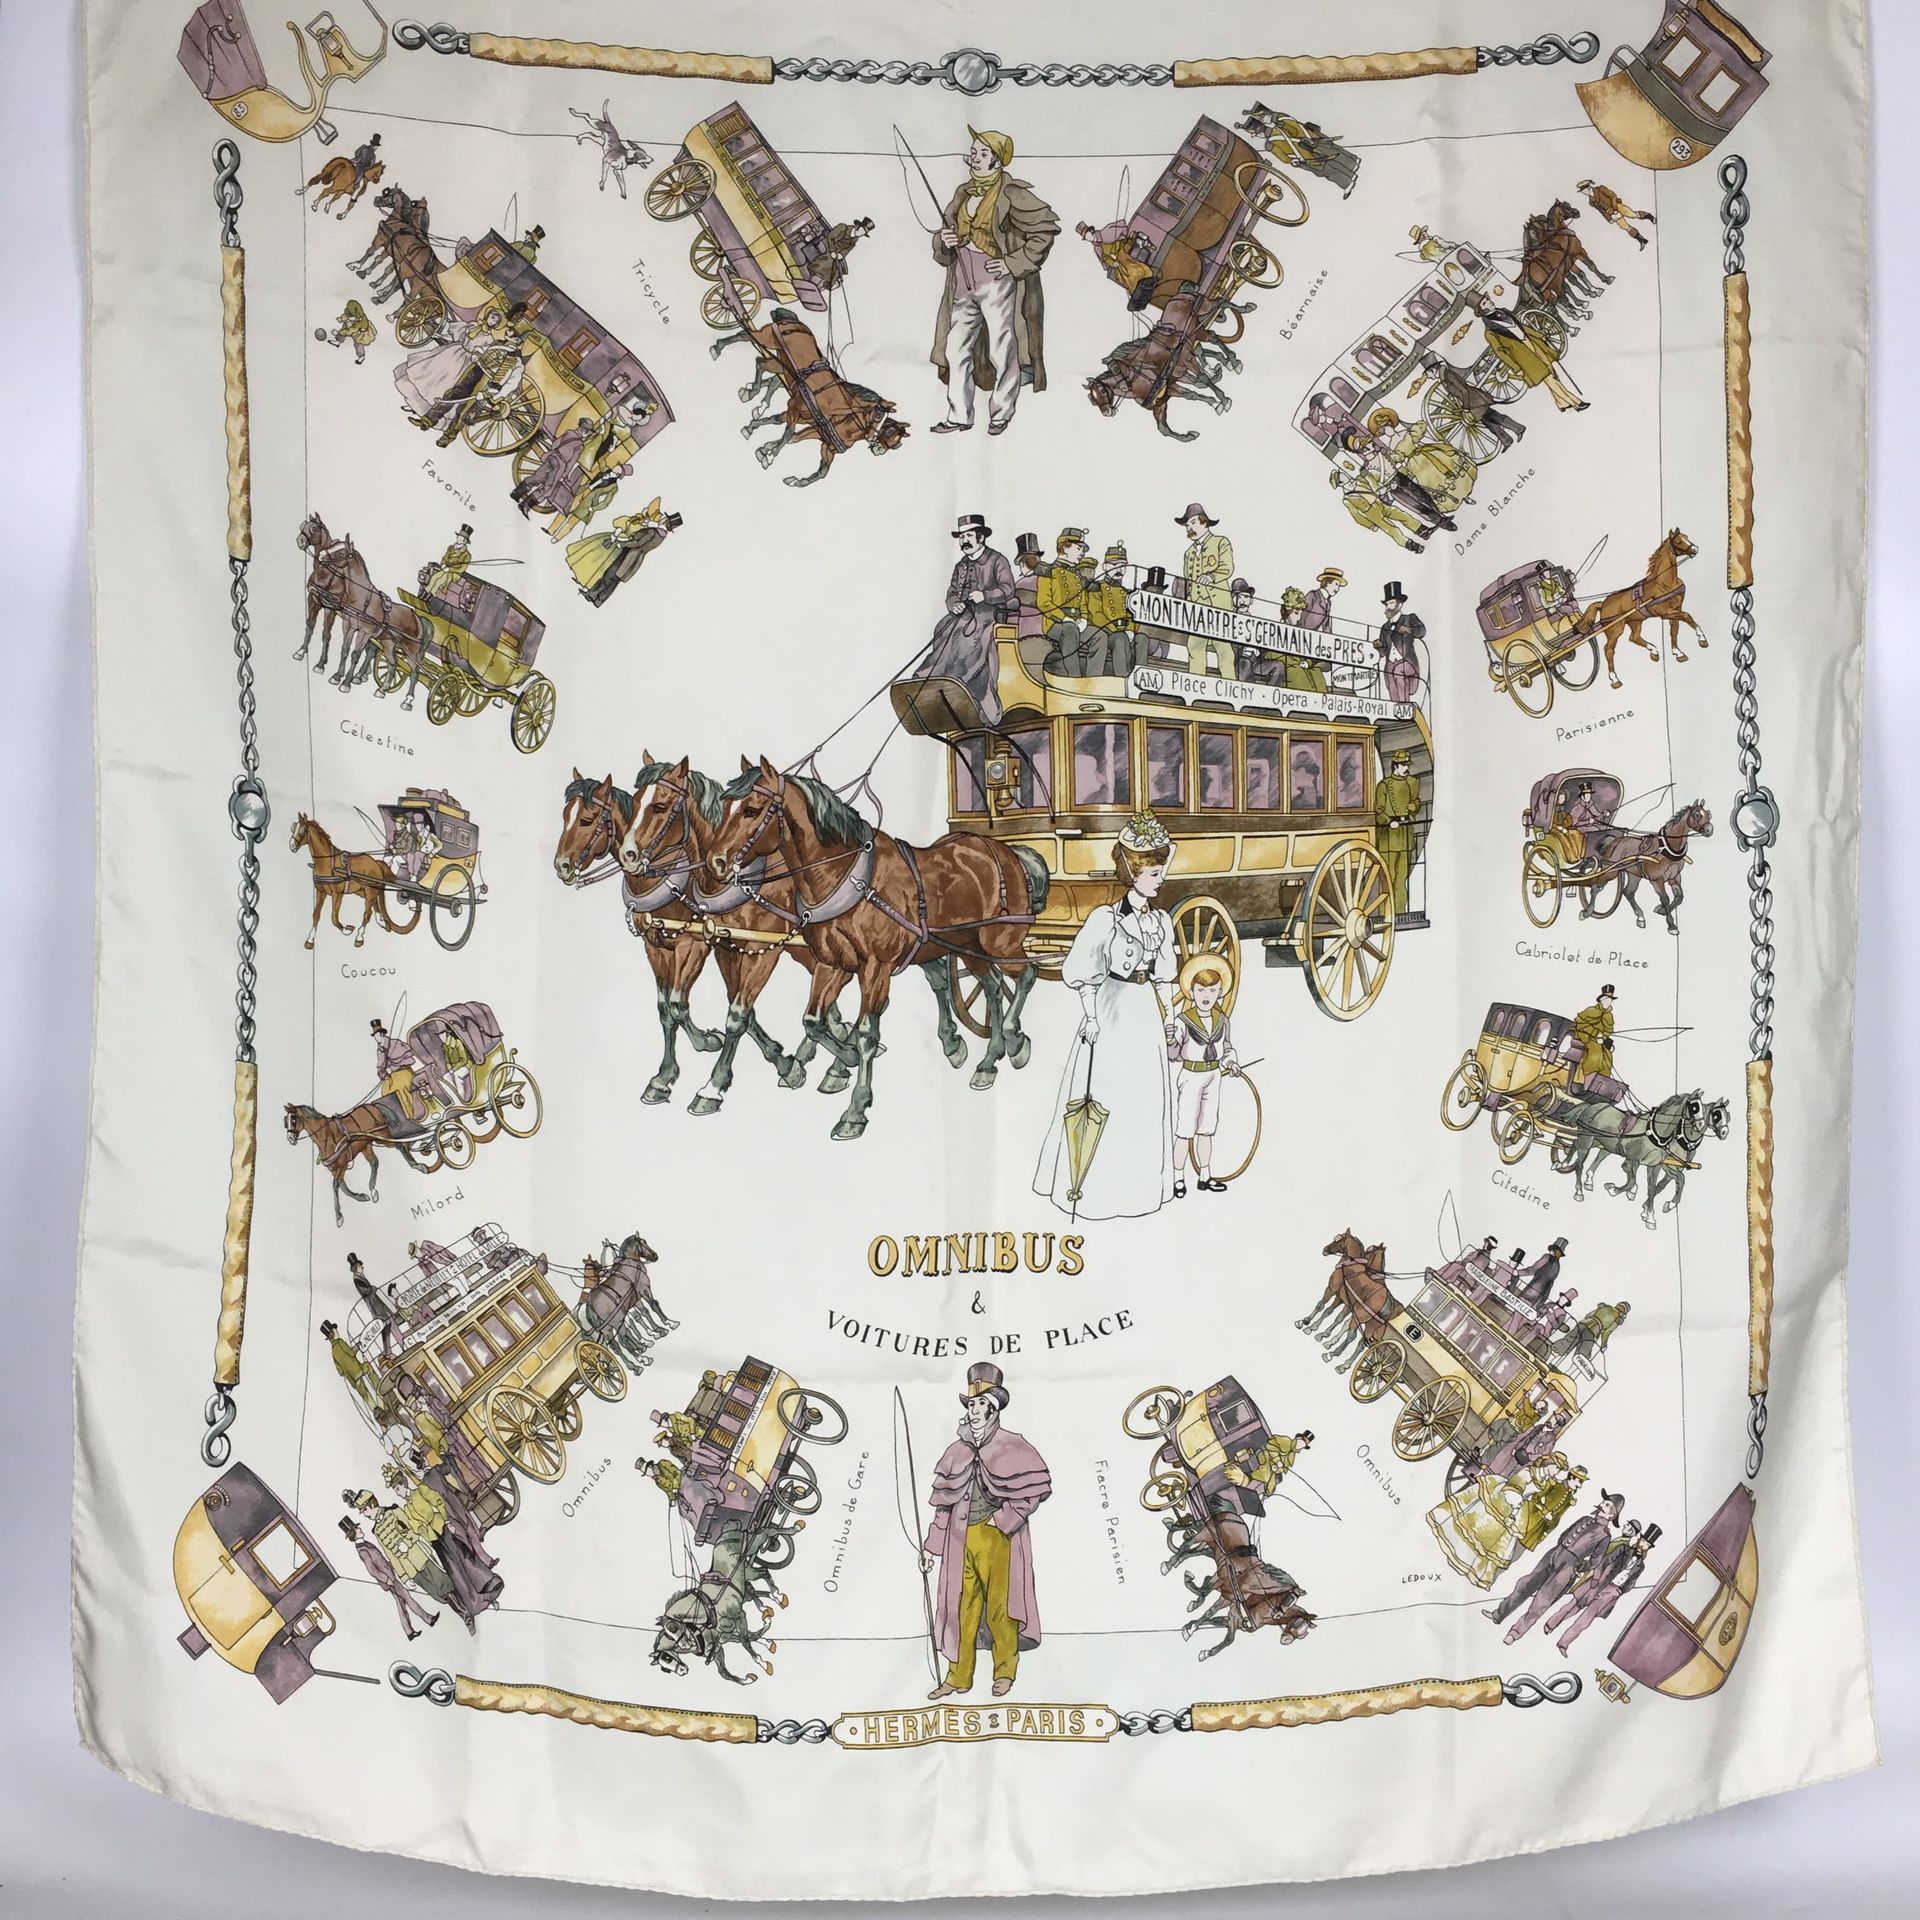 Null HERMES PARIS Silk scarf titled Omnibus and car of place. Drawn threads.